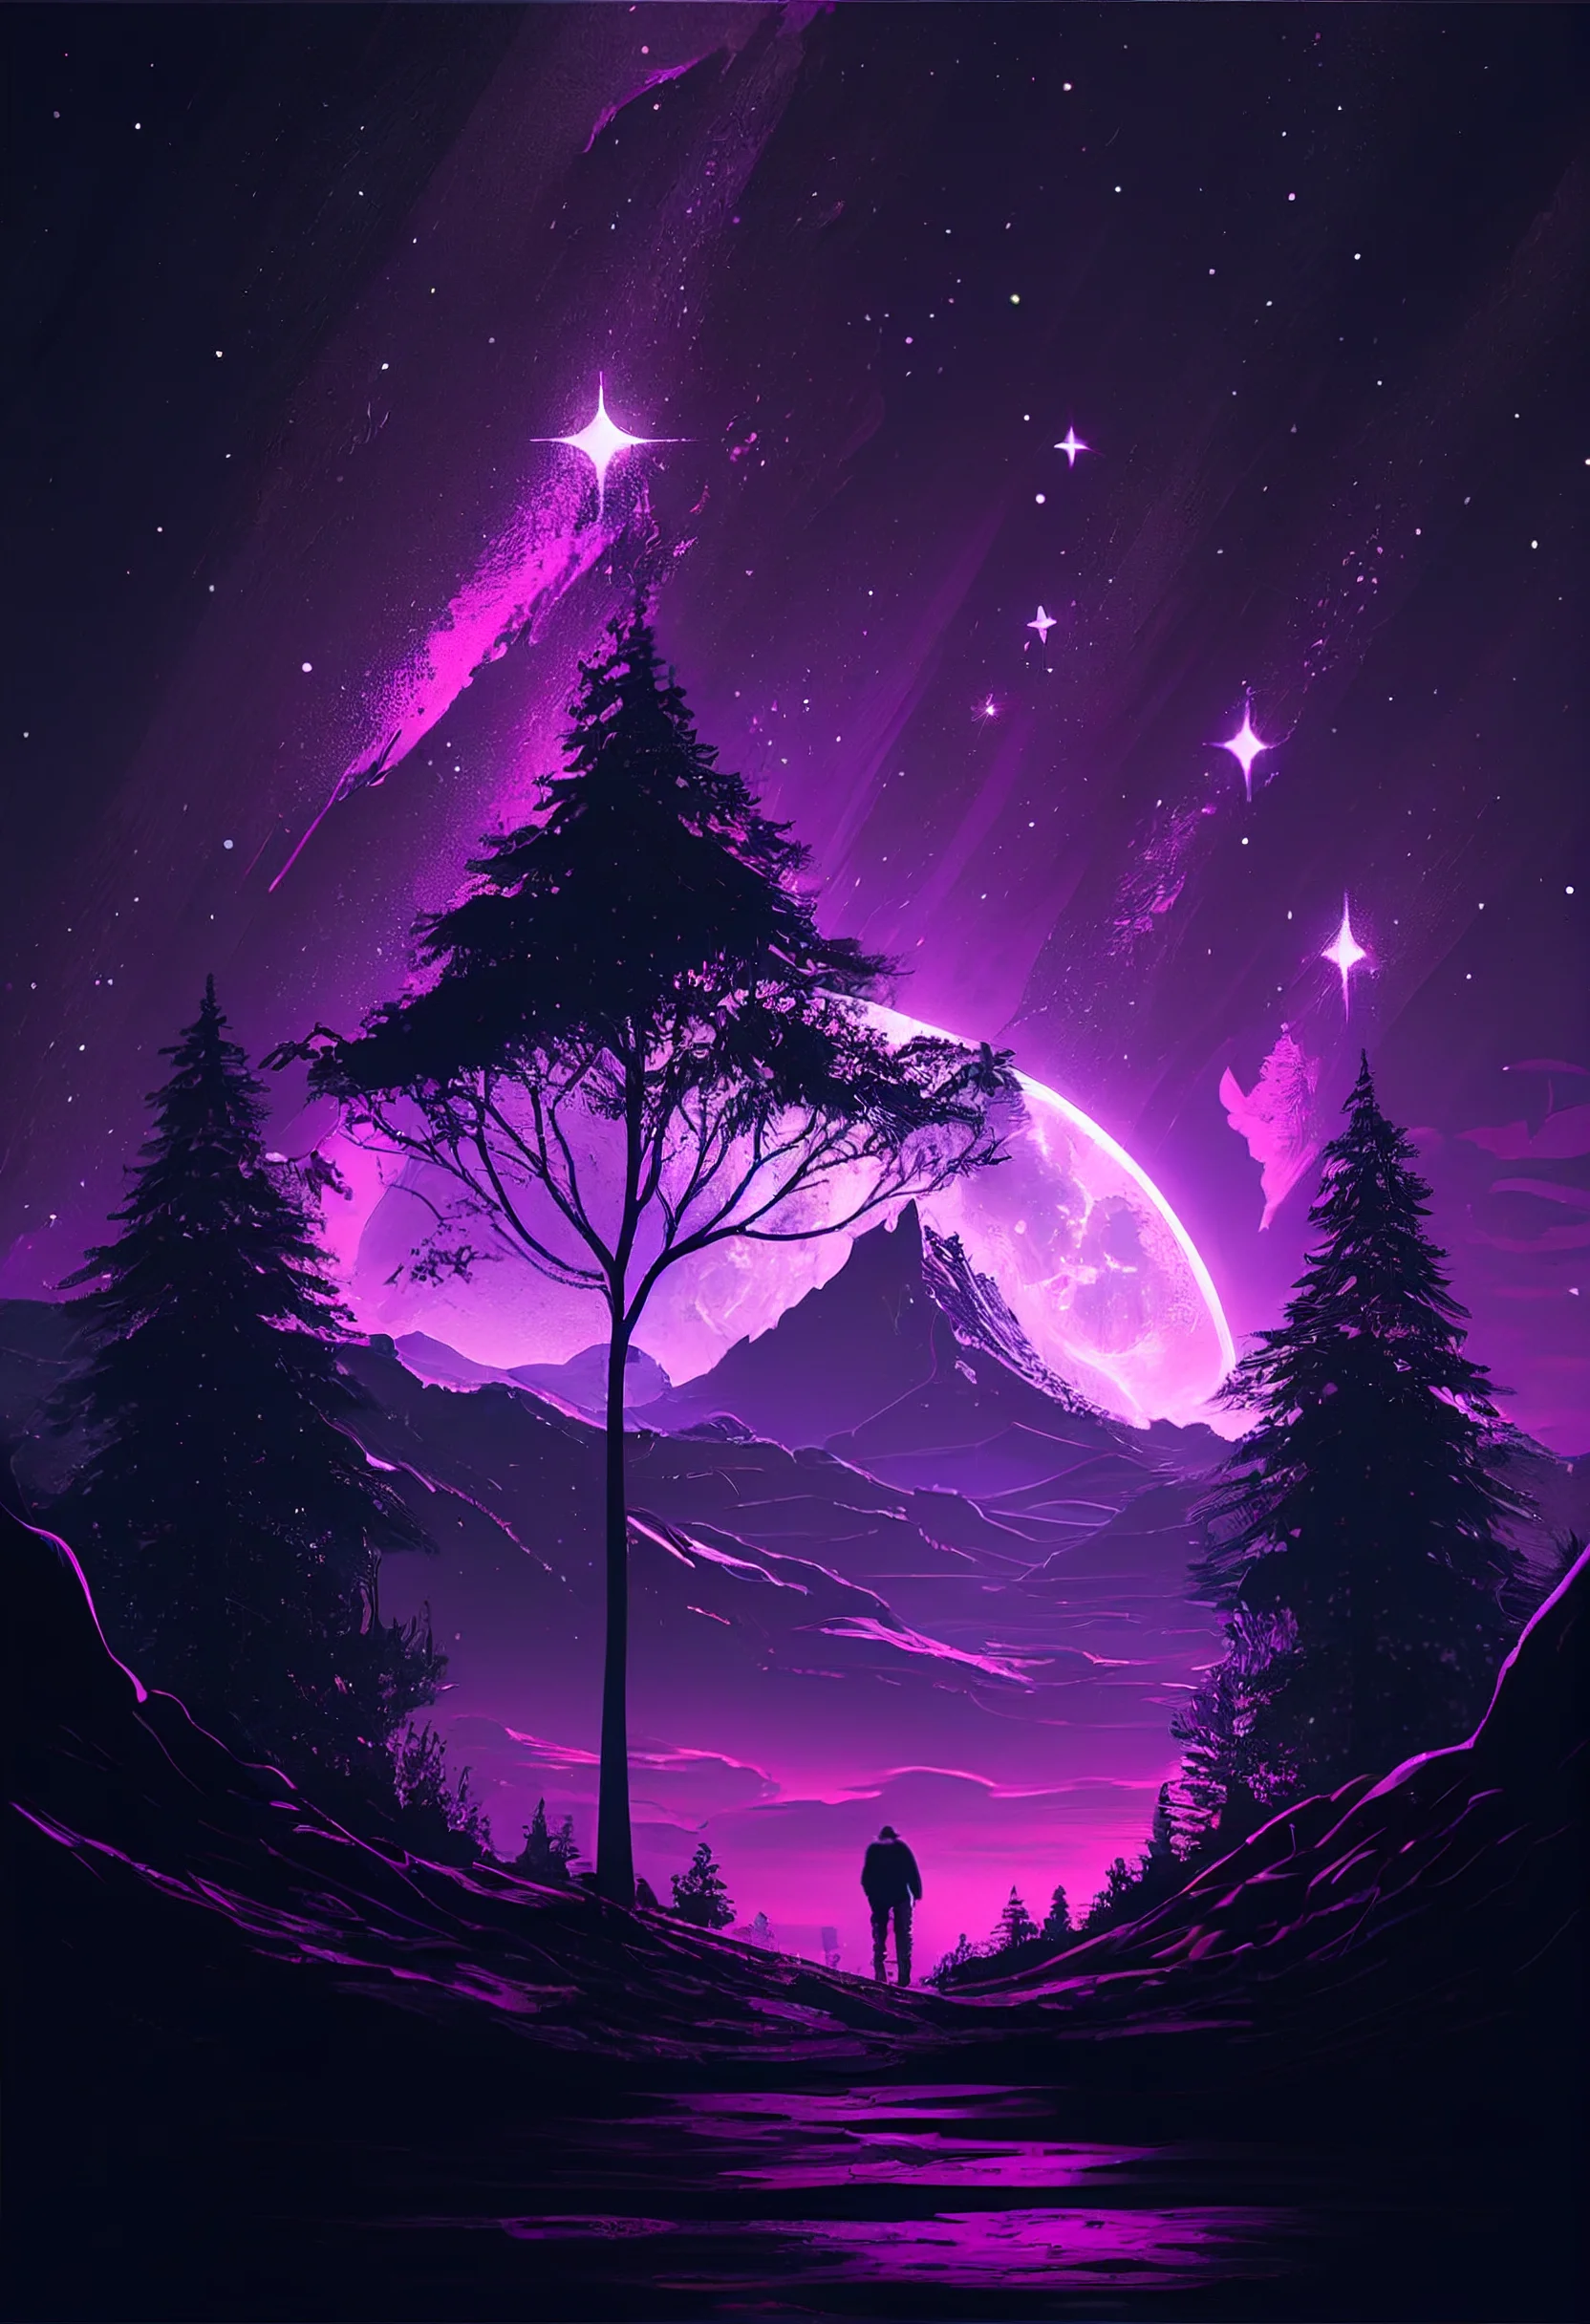 A purple and black image of a person standing in a forest with a purple sky - Purple, iPhone, violet, calming, inspirational, motivational, cool, alien, couple, cute purple